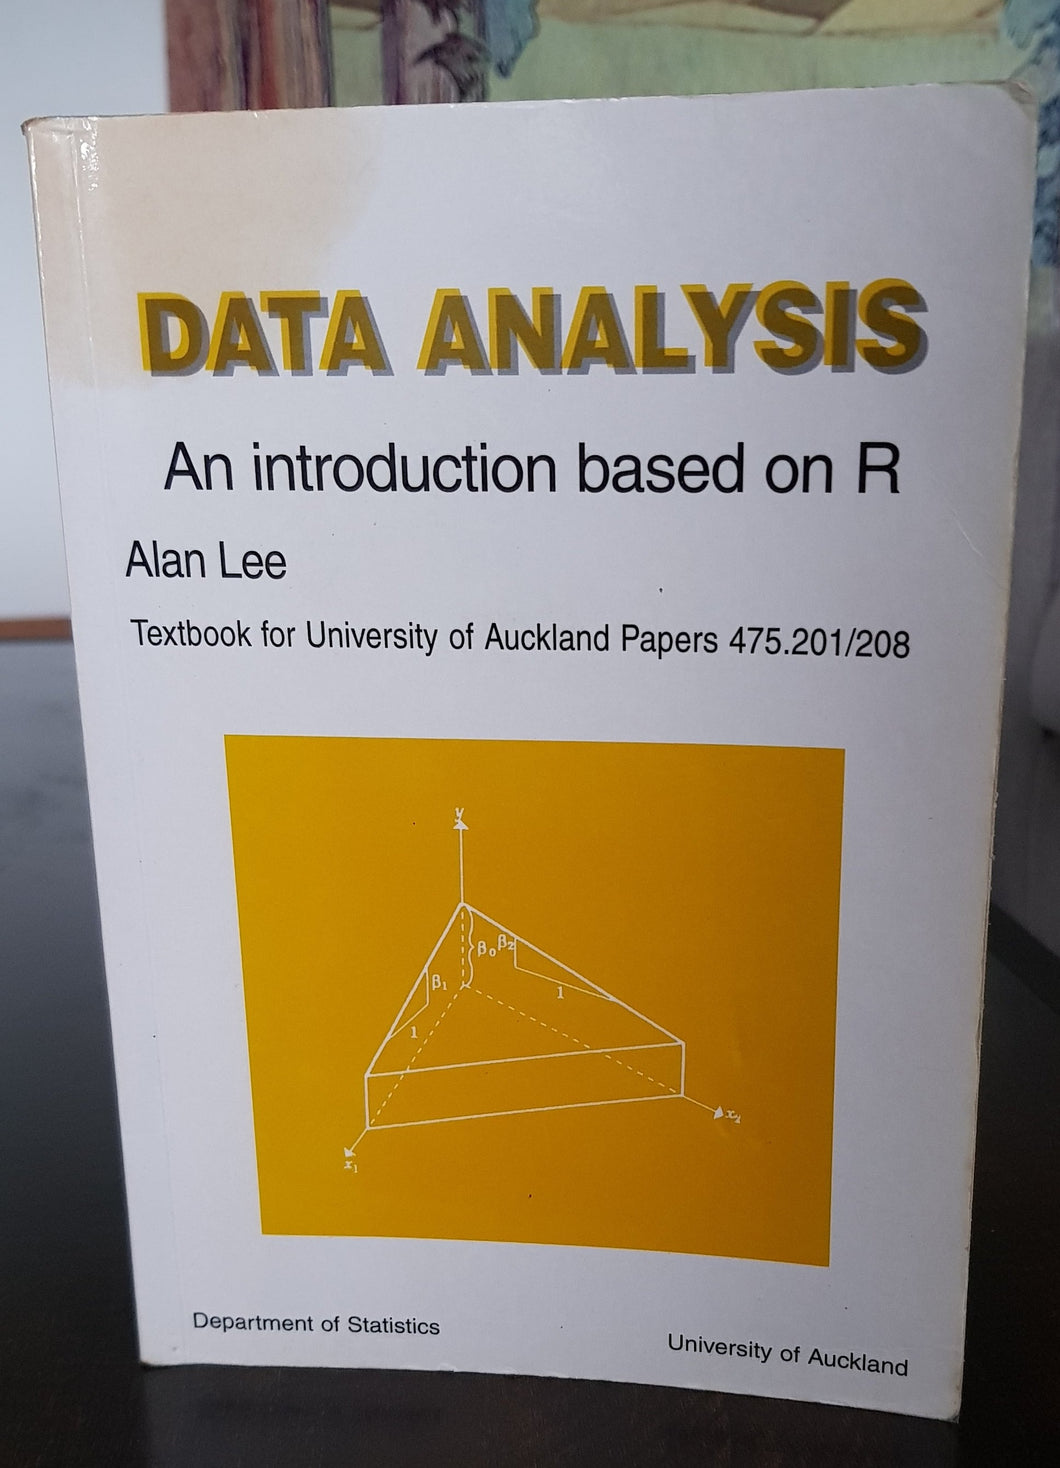 Data Analysis: An Introduction Based on R by Alan Lee